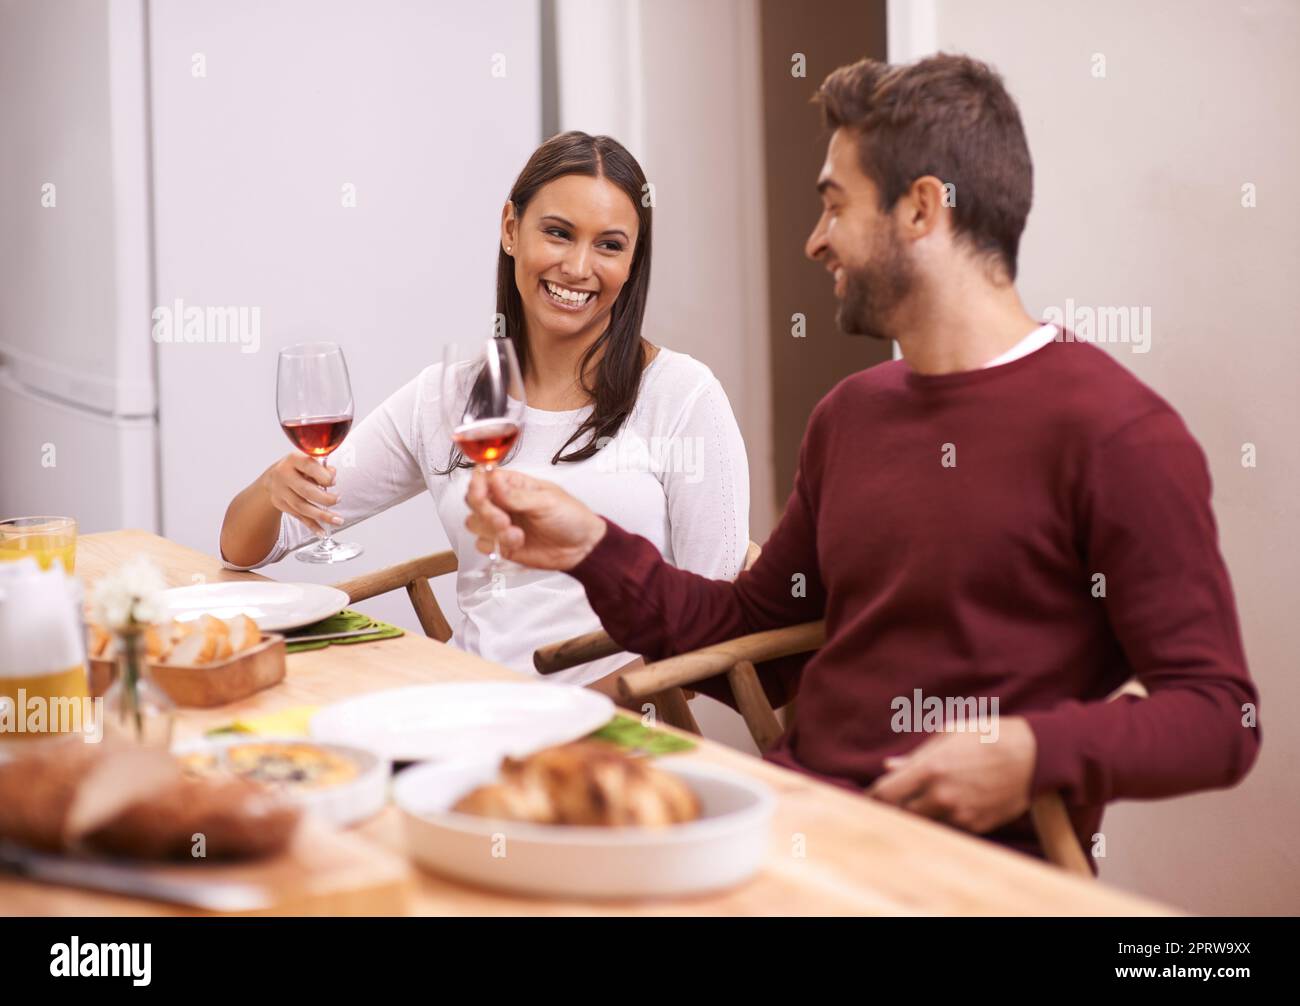 Lets toast to the food on our table. A happy couple enjoying a family meal around the table. Stock Photo